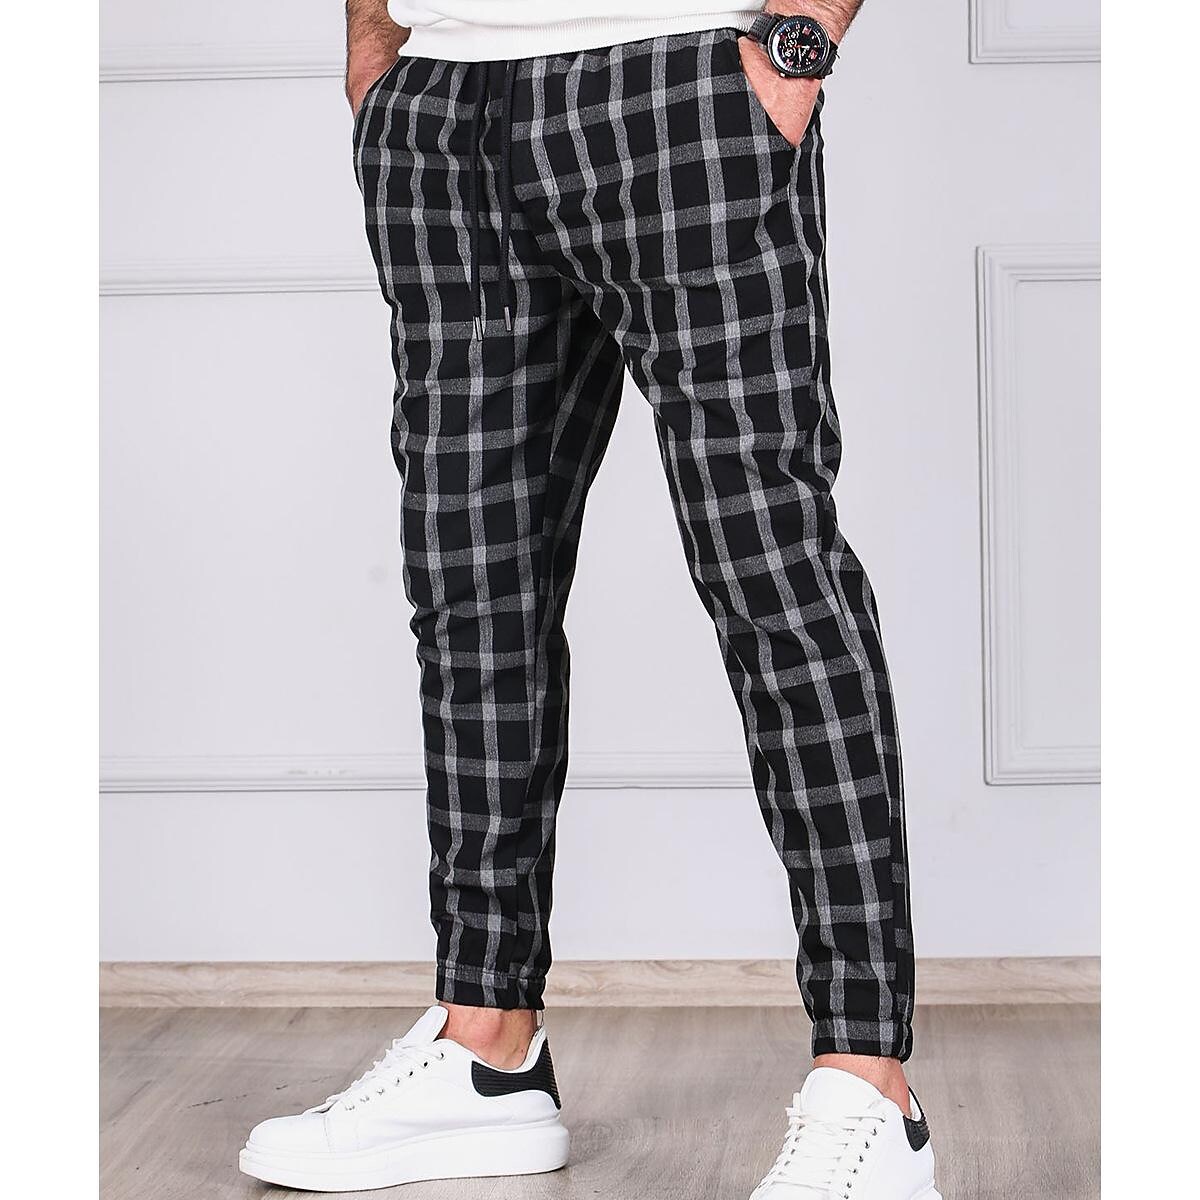 Men's new small plaid striped tethered jogging pants 